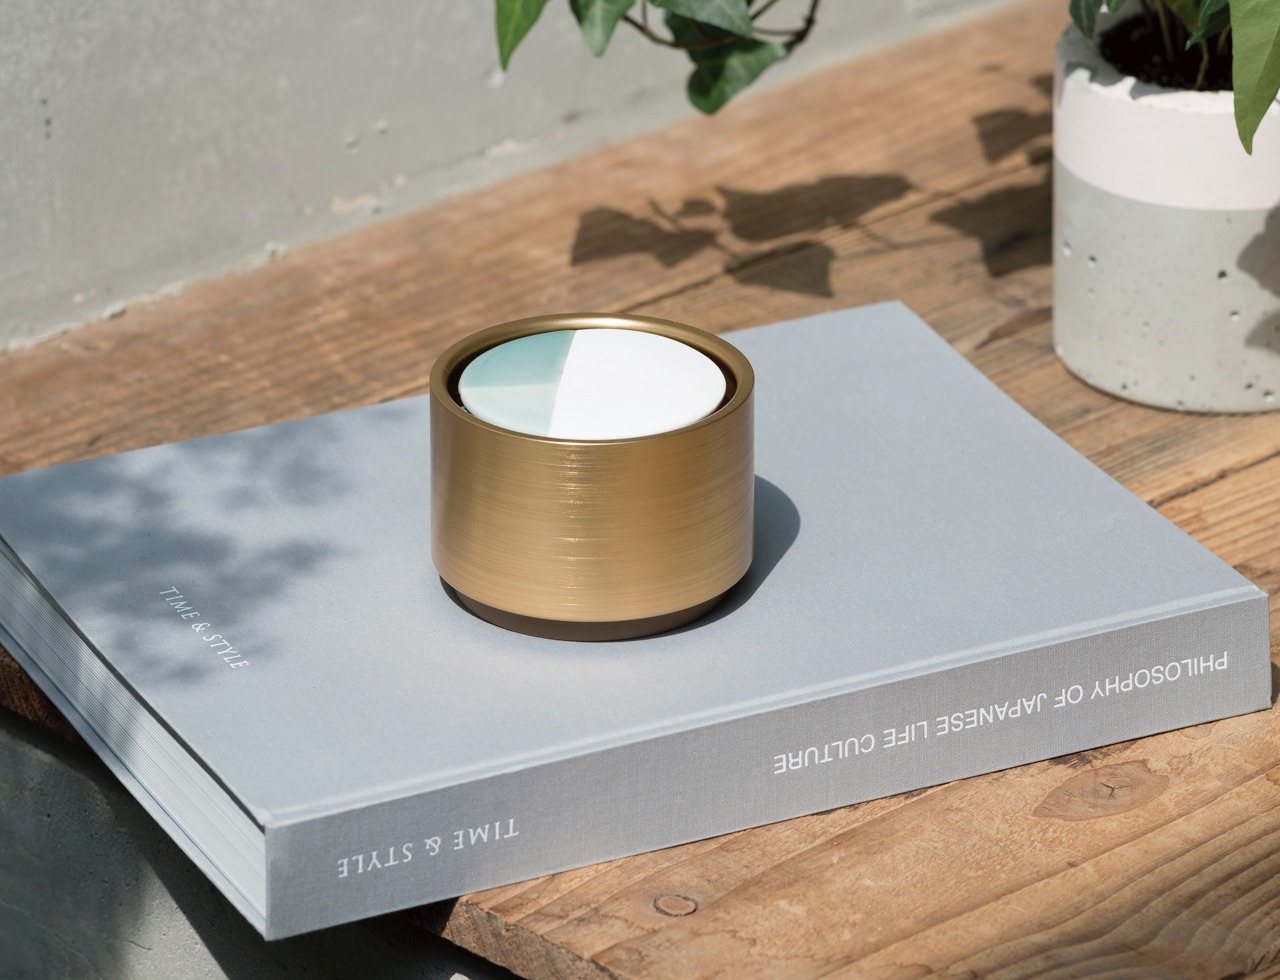 Top 5 Japanese Designs Gift Guide to Bring Peace and Productivity to Modern Life